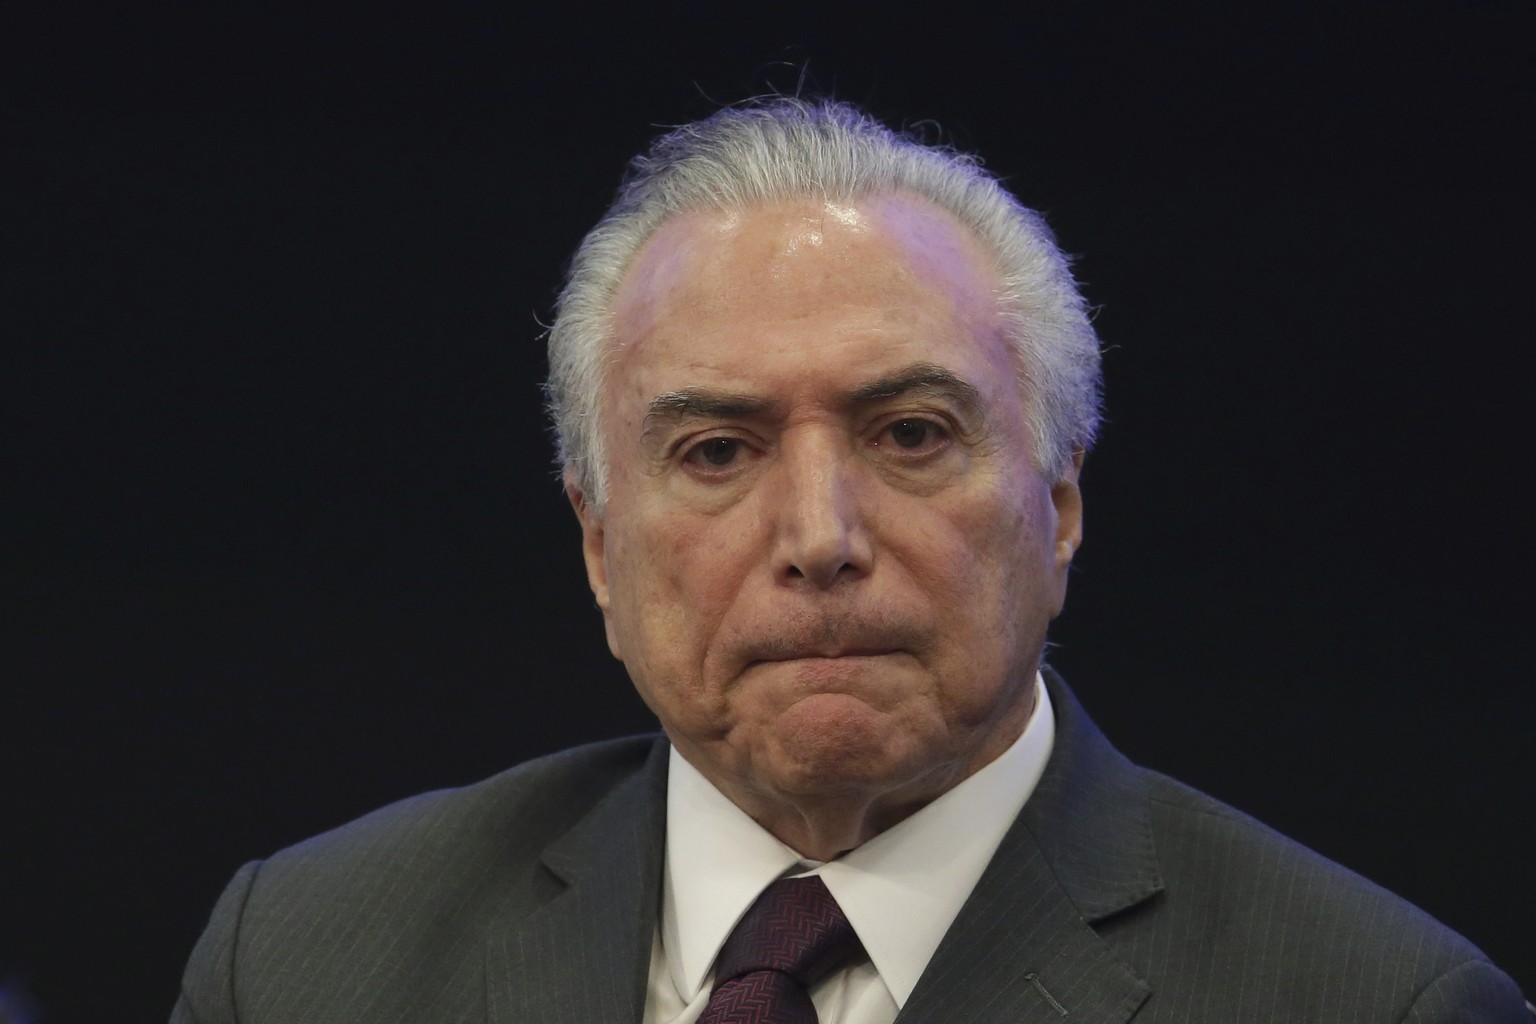 Brazil&#039;s President Michel Temer listens in during a event at the Brazilian Institute of Research in Brasilia, Brazil, Monday, May 8, 2017. A year after taking power amid a bitter impeachment batt ...